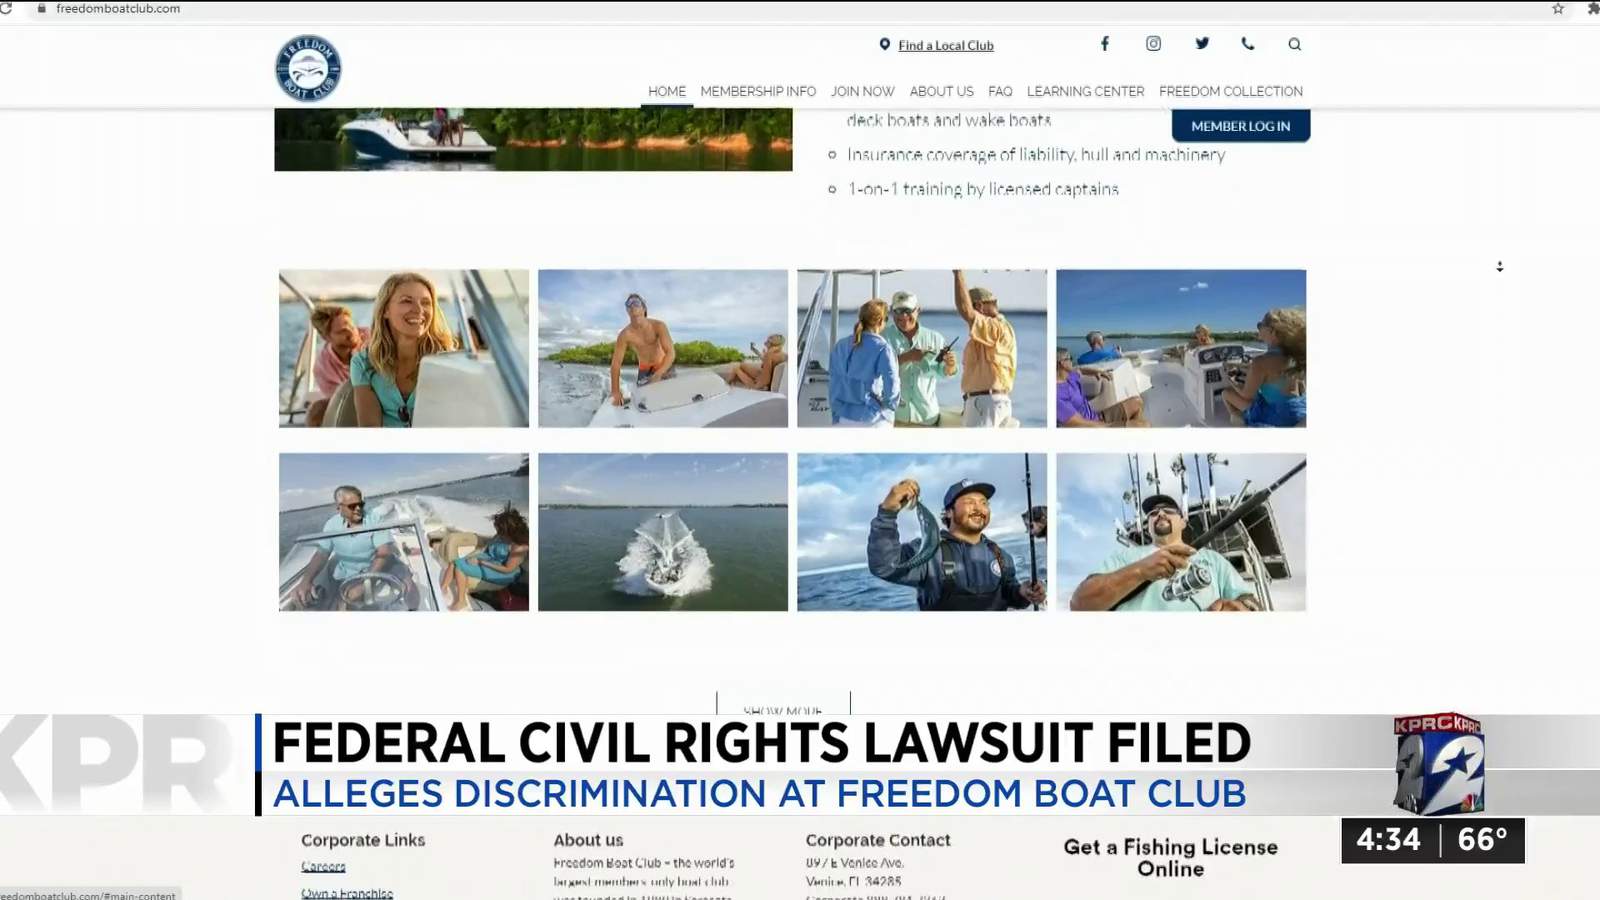 Woman who claims local boat club discriminated against her takes legal action